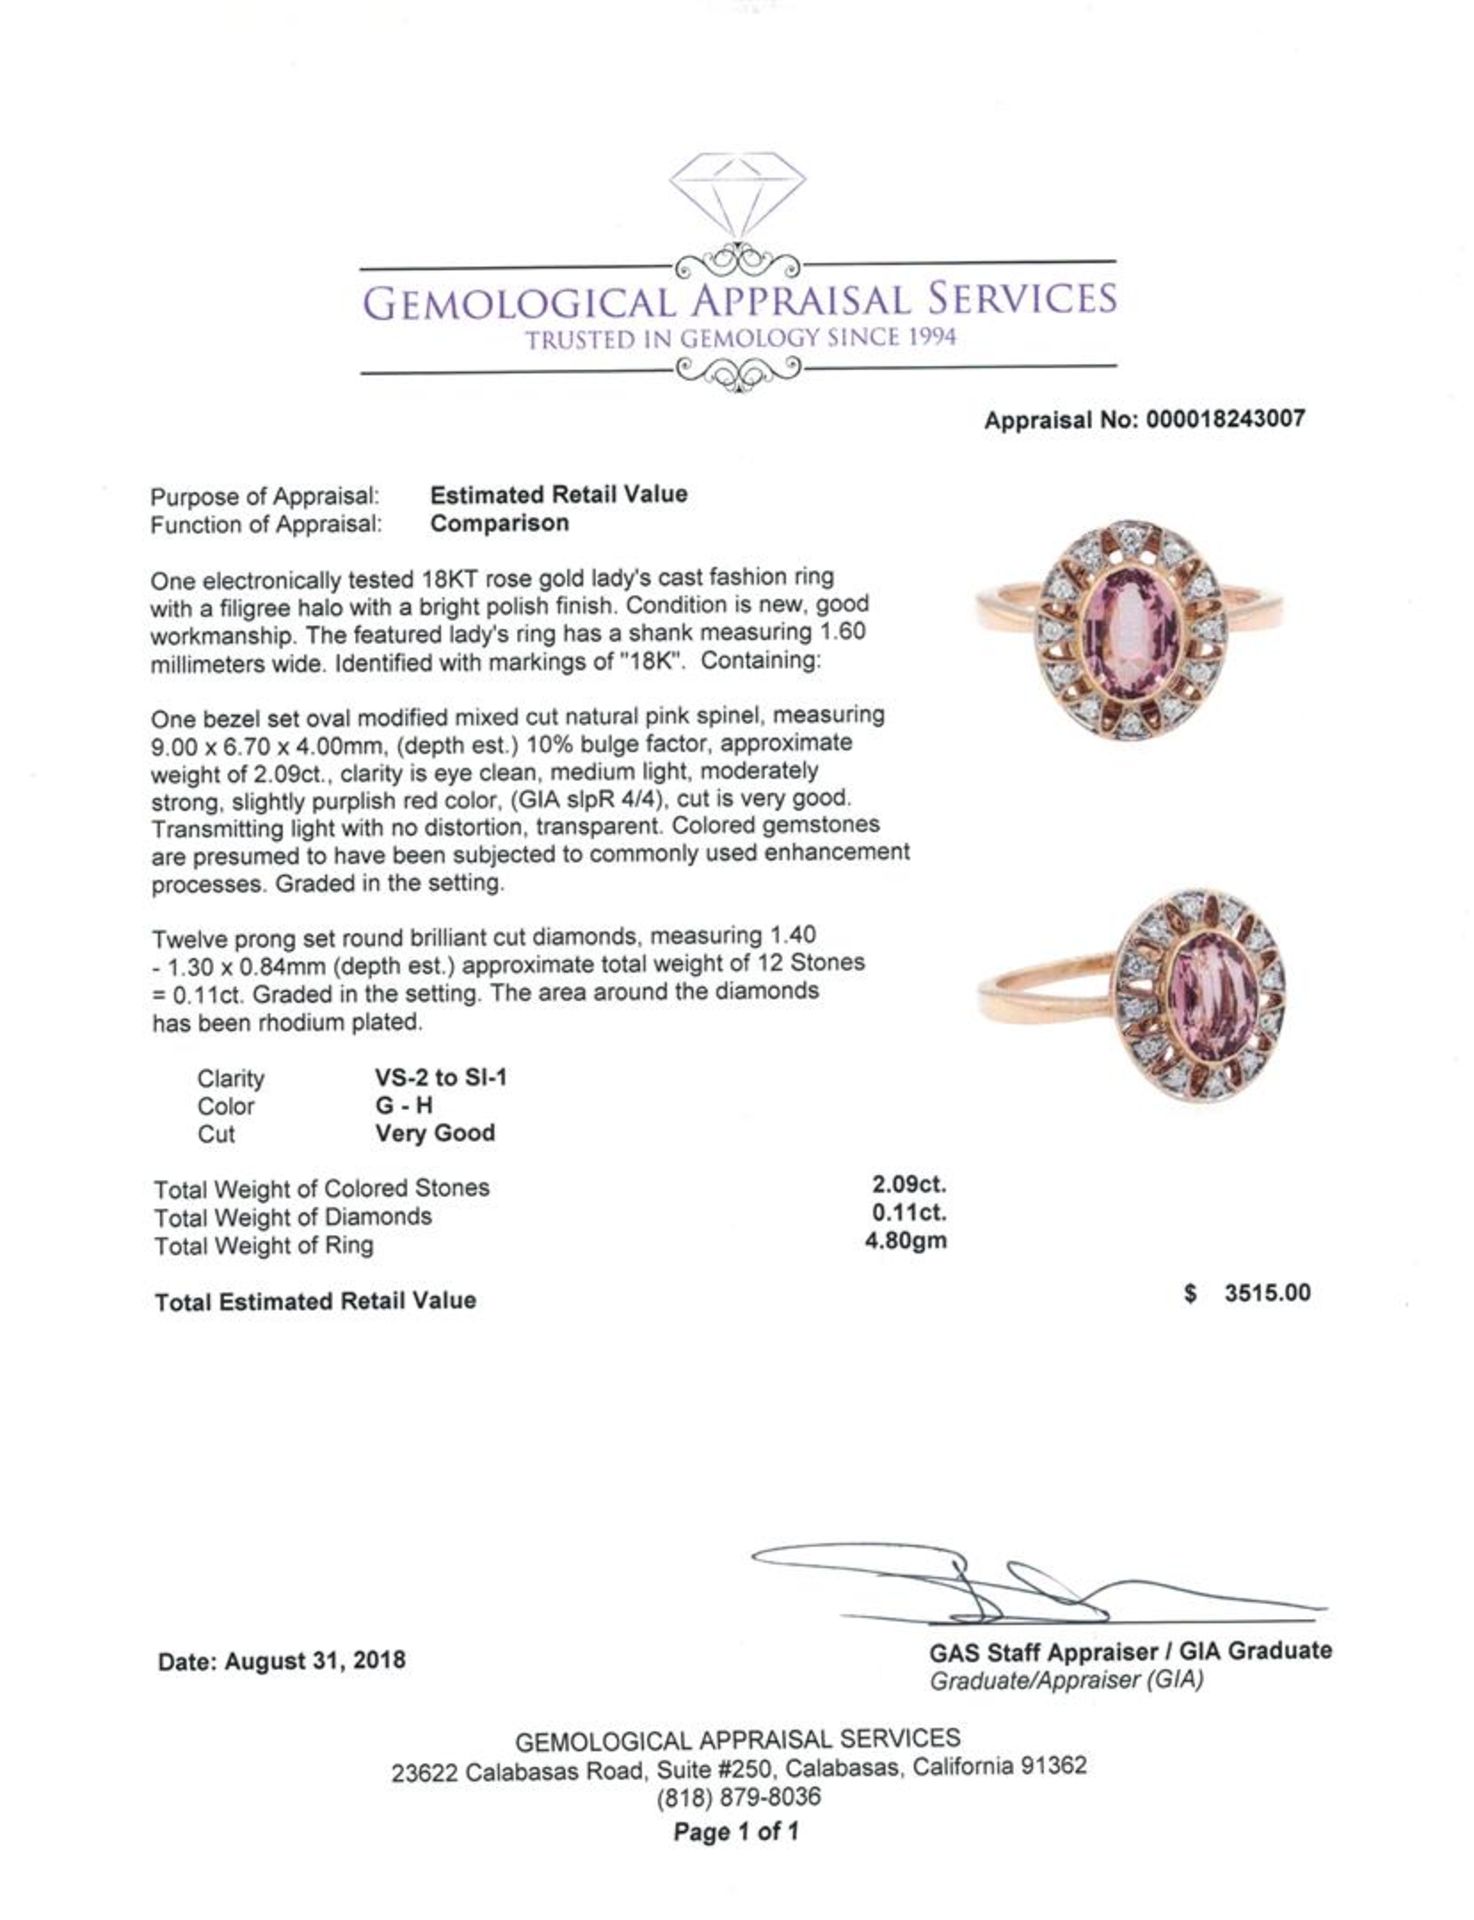 2.20 ctw Oval Mixed Pink Spinel And Round Brilliant Cut Diamond Ring - 18KT Rose - Image 5 of 5